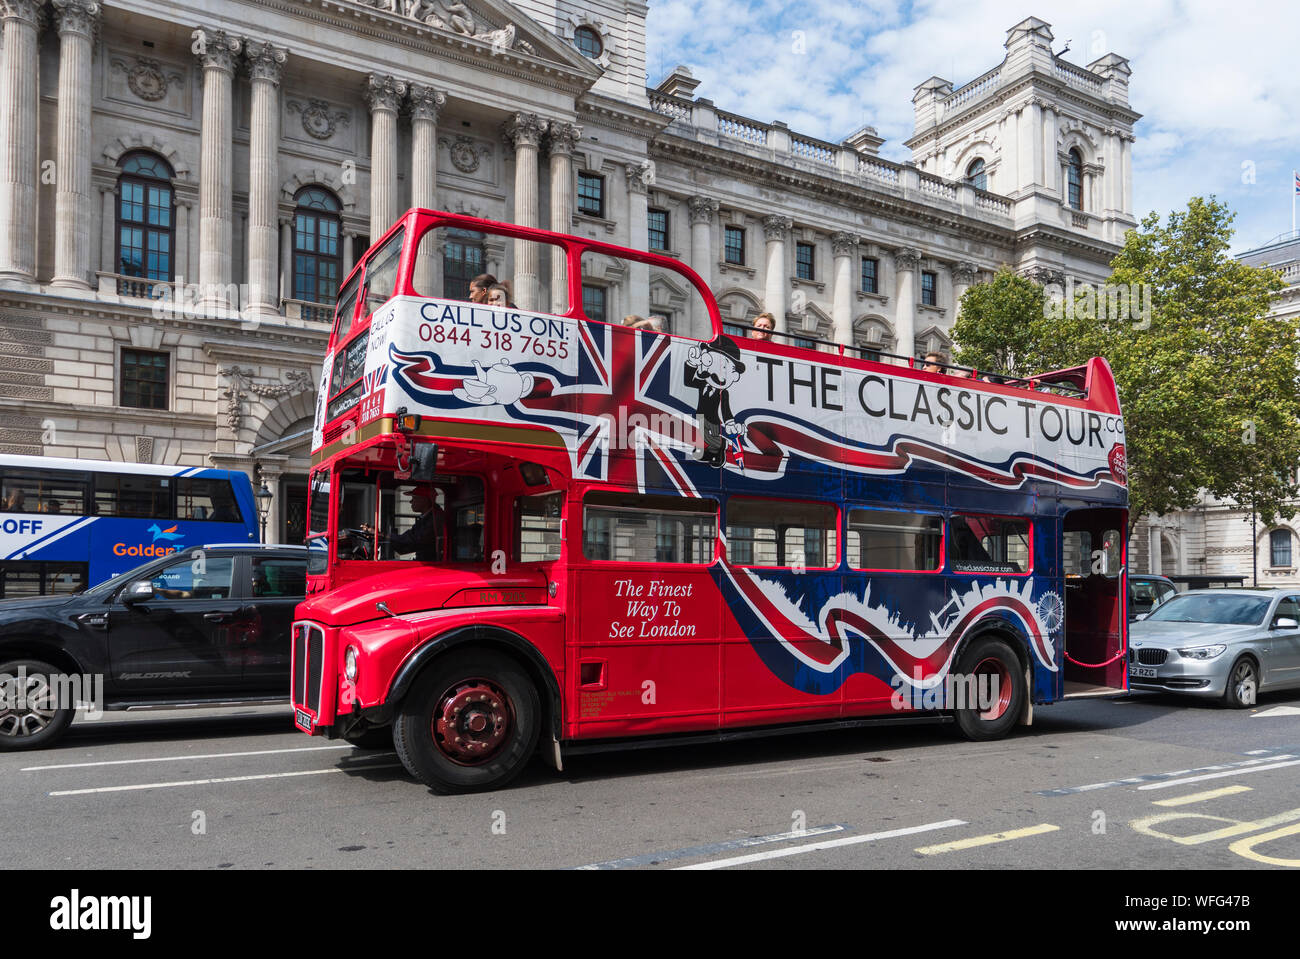 The Classic Tour, an open top tourist sightseeing bus in an old 1960s red Routemaster bus in the City of Westminster, London, England, UK. Stock Photo